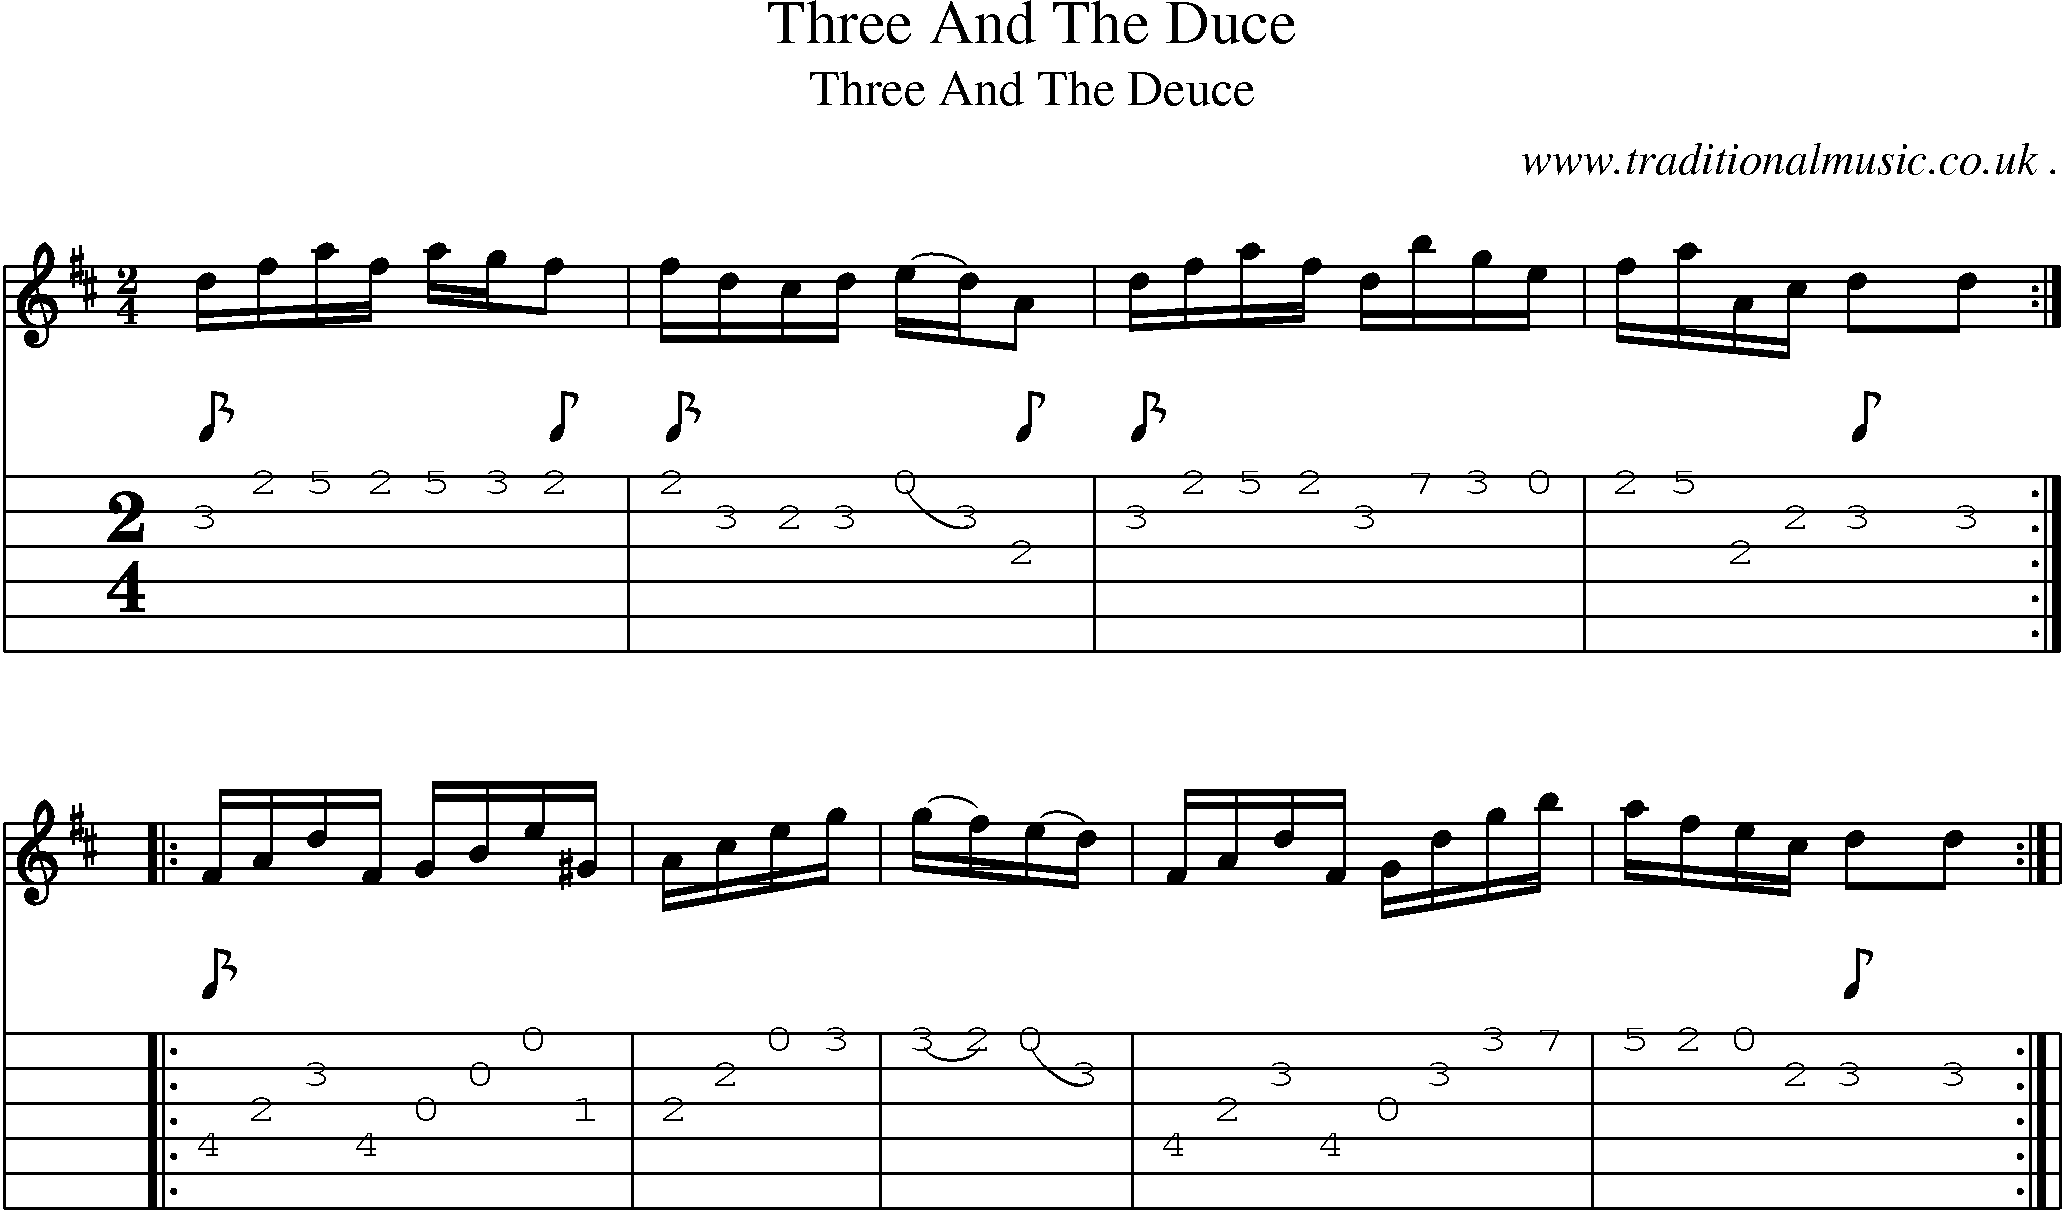 Sheet-Music and Guitar Tabs for Three And The Duce